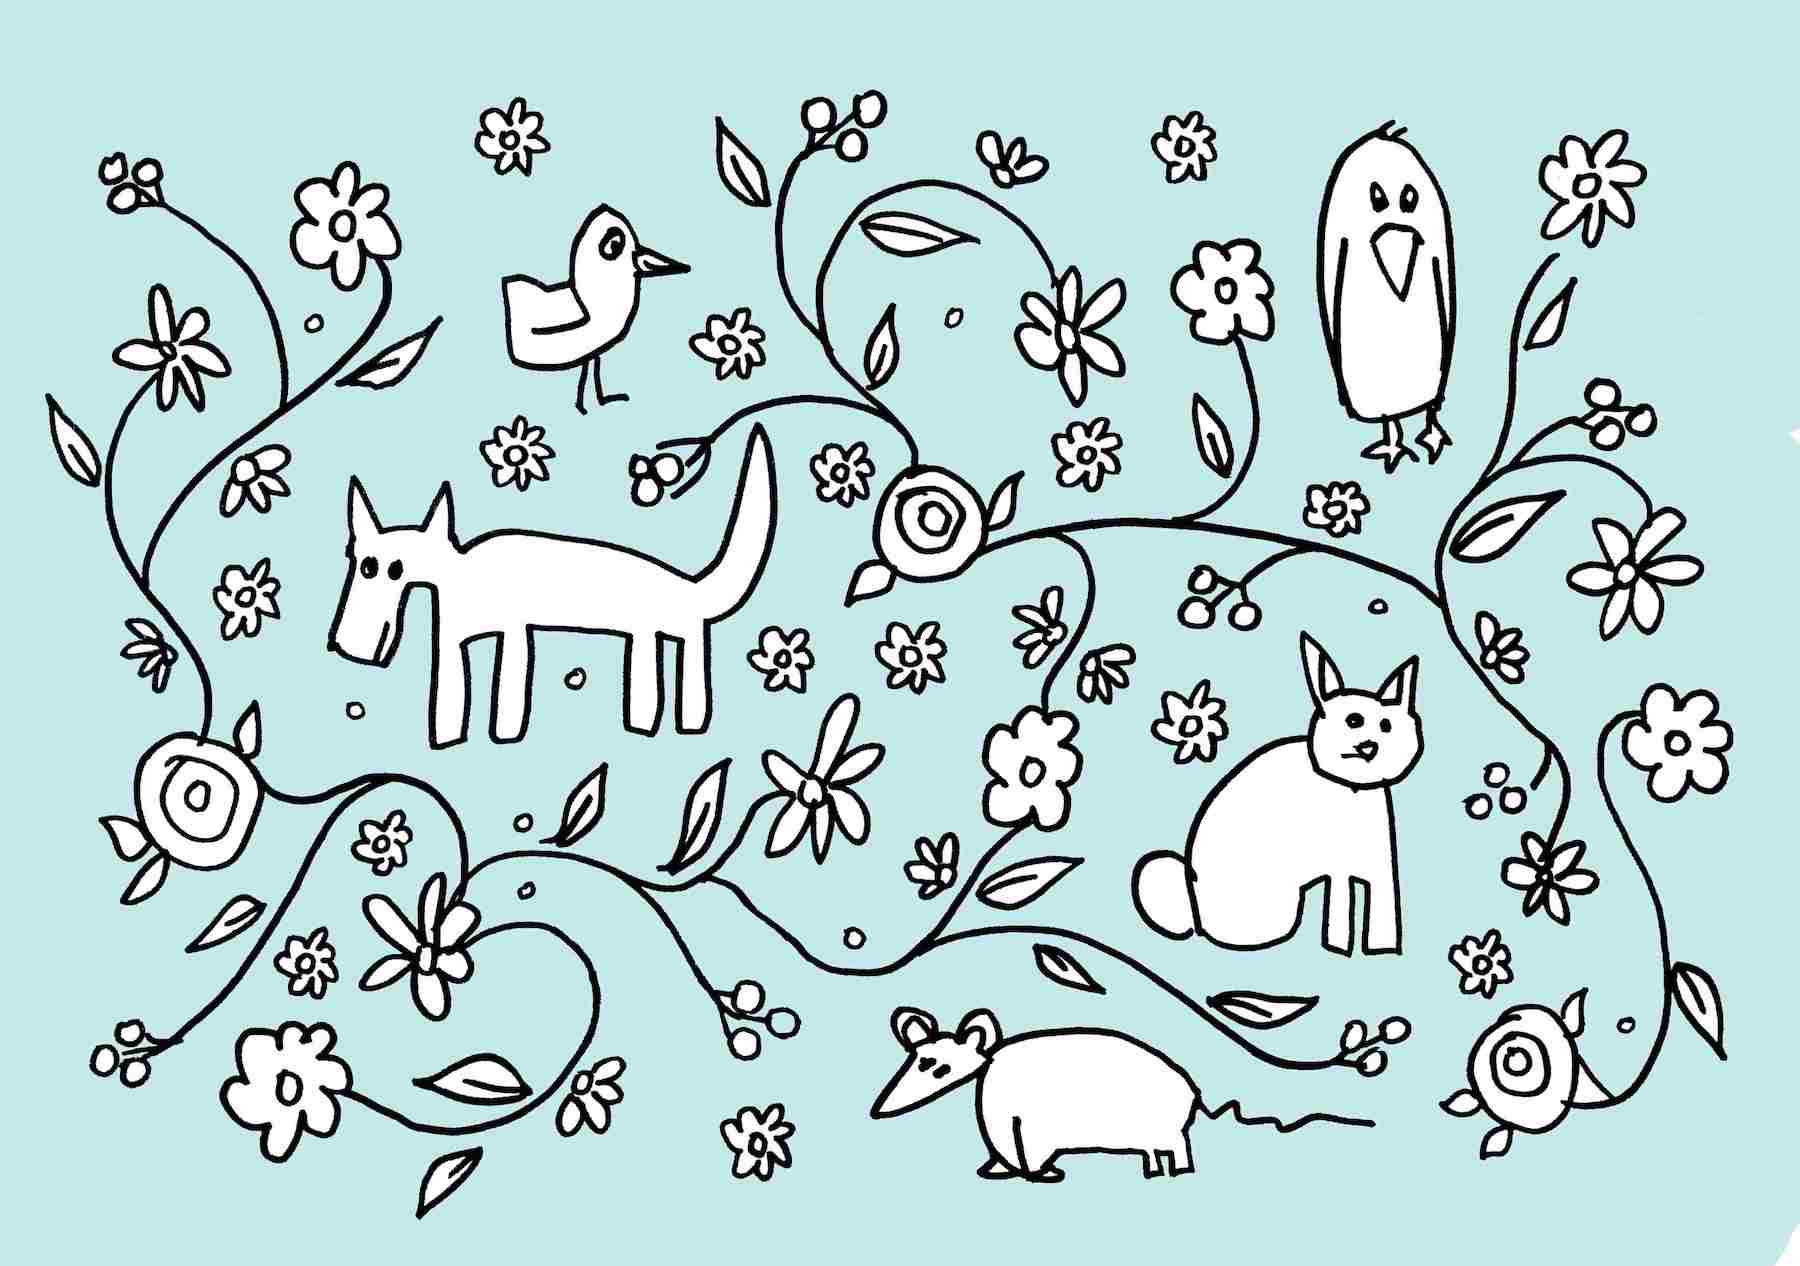 art every day number 686 / pattern illustration / animal flowers